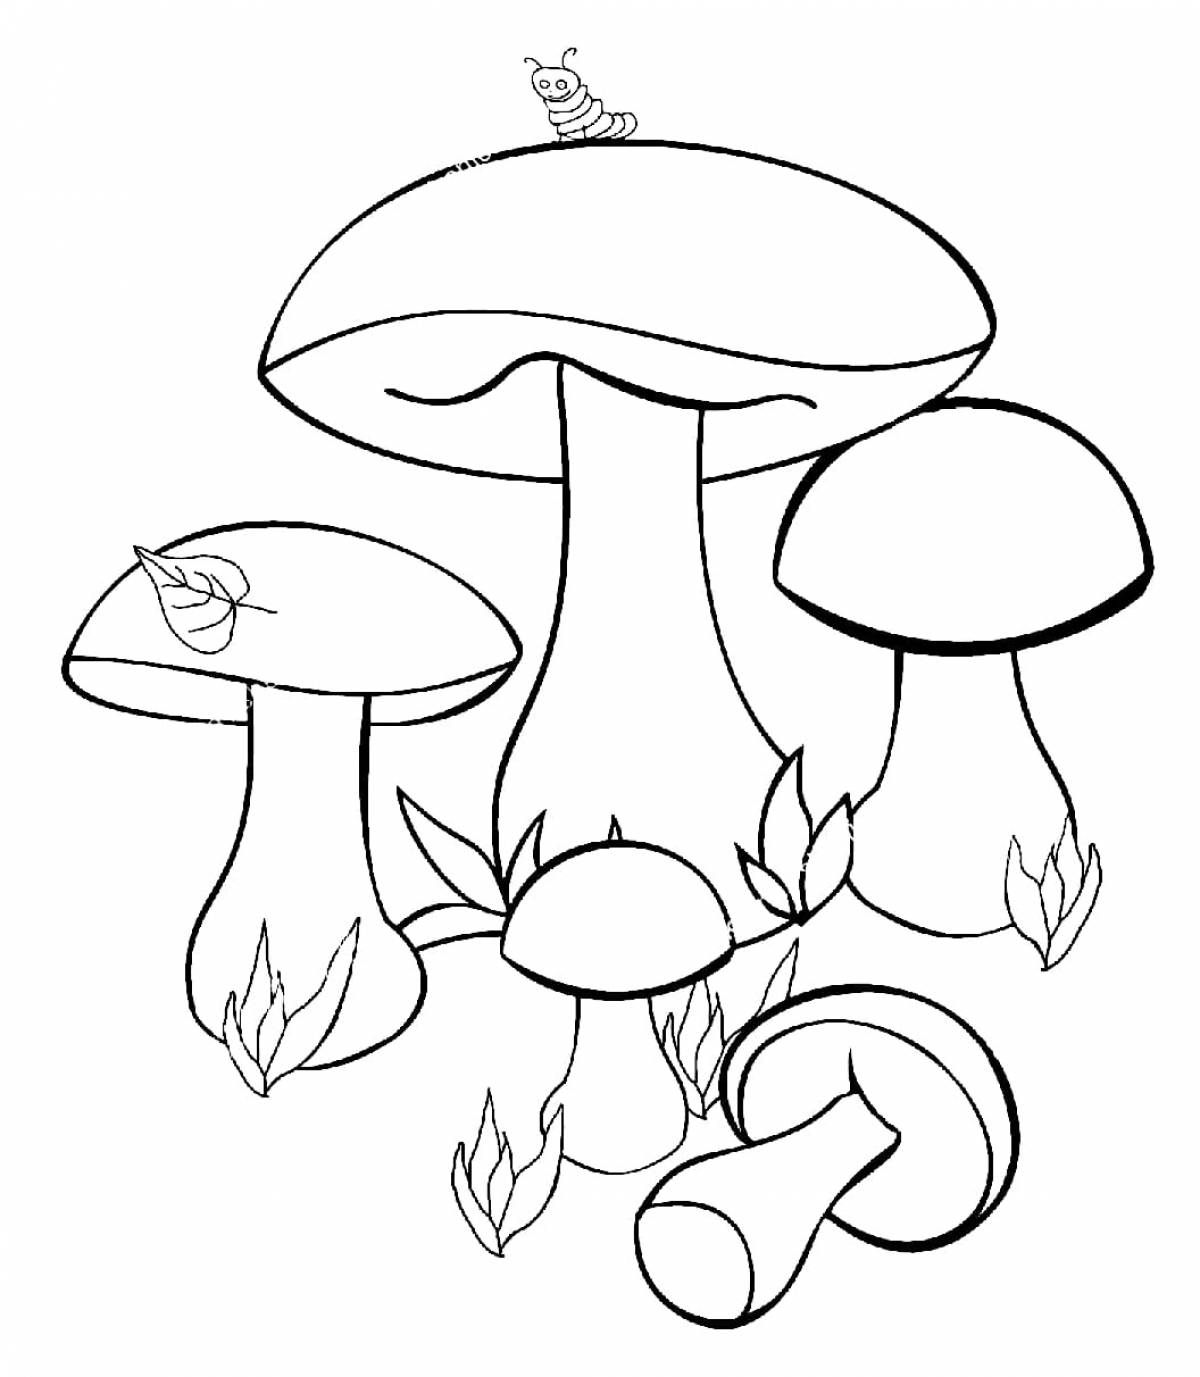 Coloring mushroom during play for children 6-7 years old